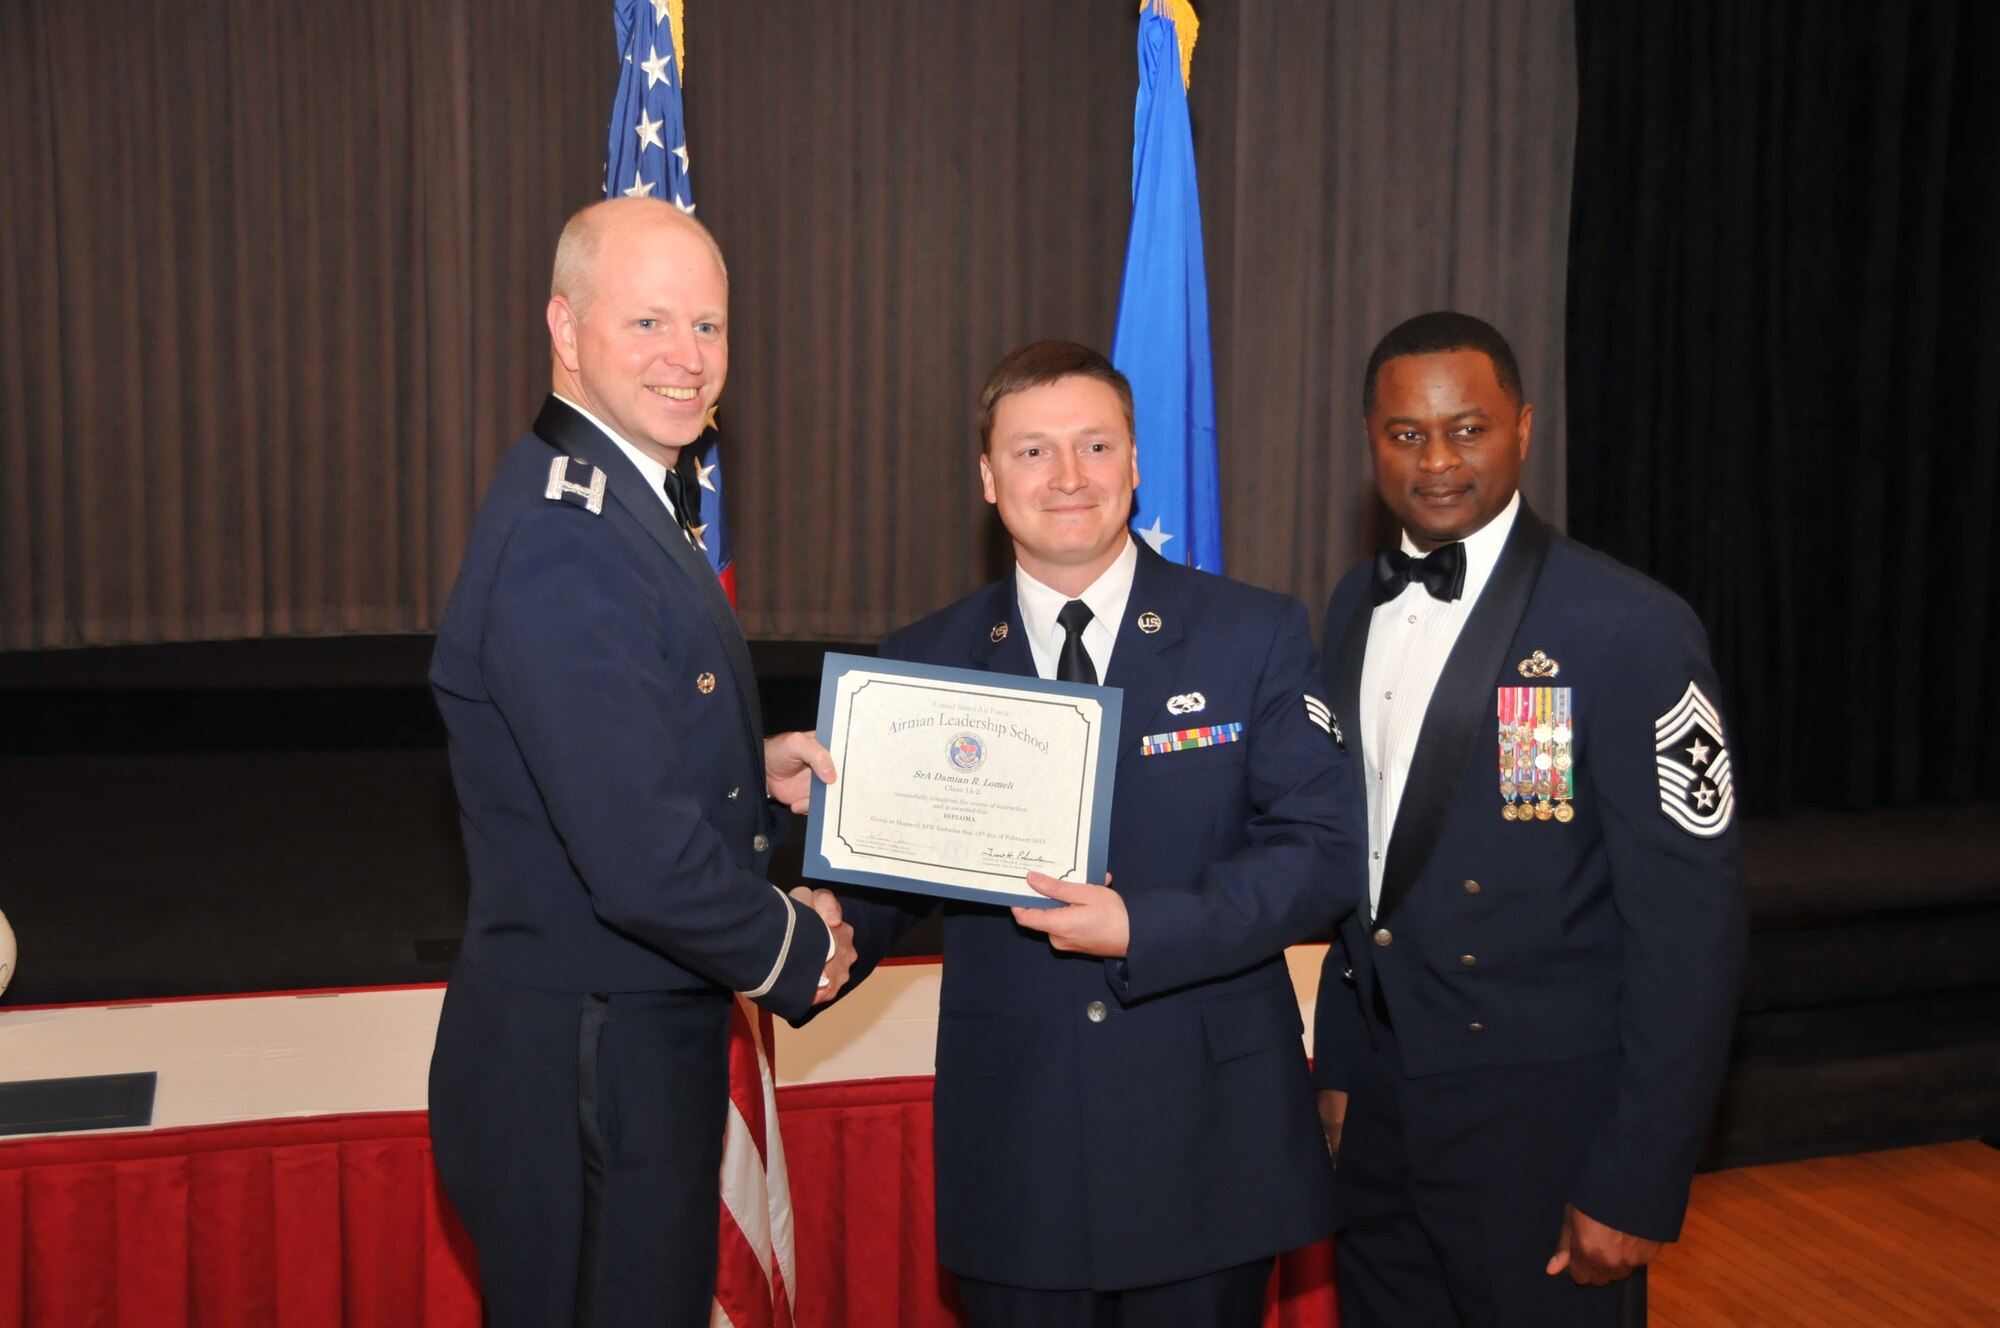 U.S. Air Force Col. Mark Ramsey, Vice Commander 42nd Air Base Wing, and Chief Master Sgt. Harry Hutchinson, Command Chief 42nd Air Base Wing, presents the Airman Leadership School graduating diploma to Senior Airman Damian Lomeli, 187th Aircraft Maintenance Squadron, at Maxwell Air Force Base, Ala., Feb. 13, 2014. Airman Leadership School teaches leadership and supervisory skills to Senior Airmen and is required for Airmen to become Noncommissioned Officers.(U.S. Air Force photo by Tech. Sgt. Matthew Garrett)